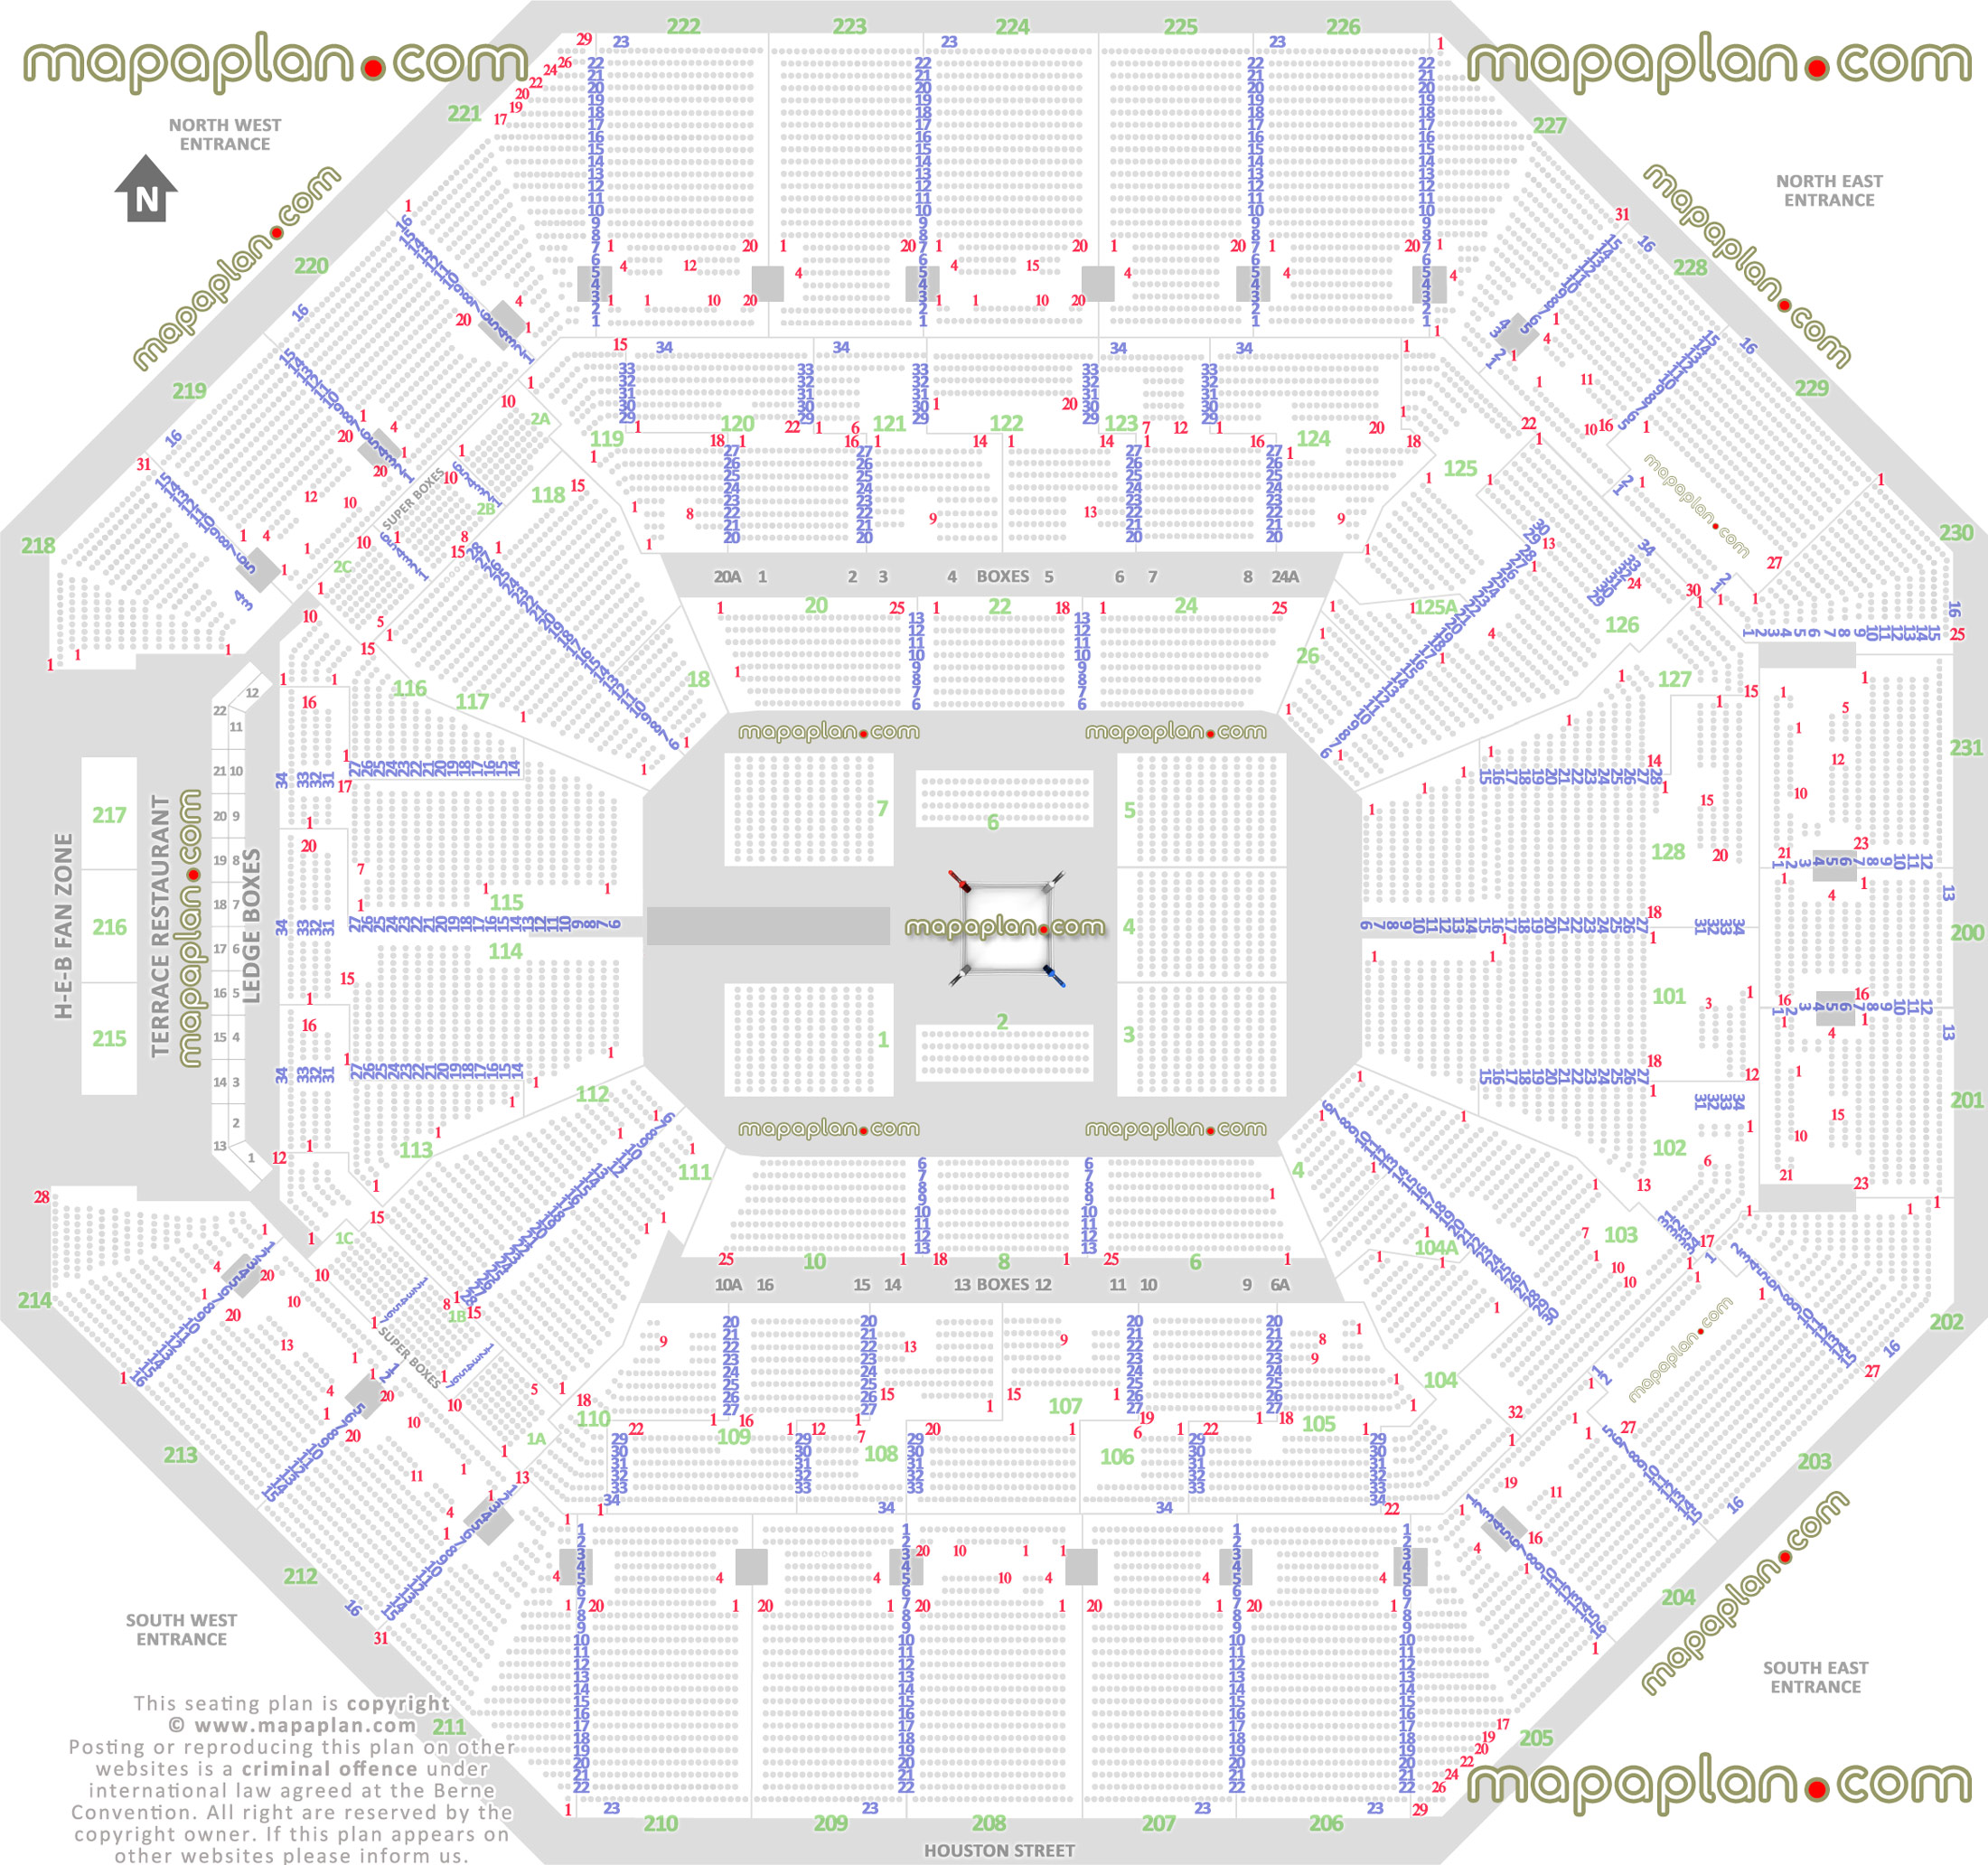 wwe wrestling boxing match events map row 360 round ring floor configuration how rows sections 101 102 103 104 104a 105 106 107 108 109 110 111 112 113 114 115 116 117 118 119 120 121 122 123 124 125 125a 126 127 128 San Antonio ATT Center seating chart